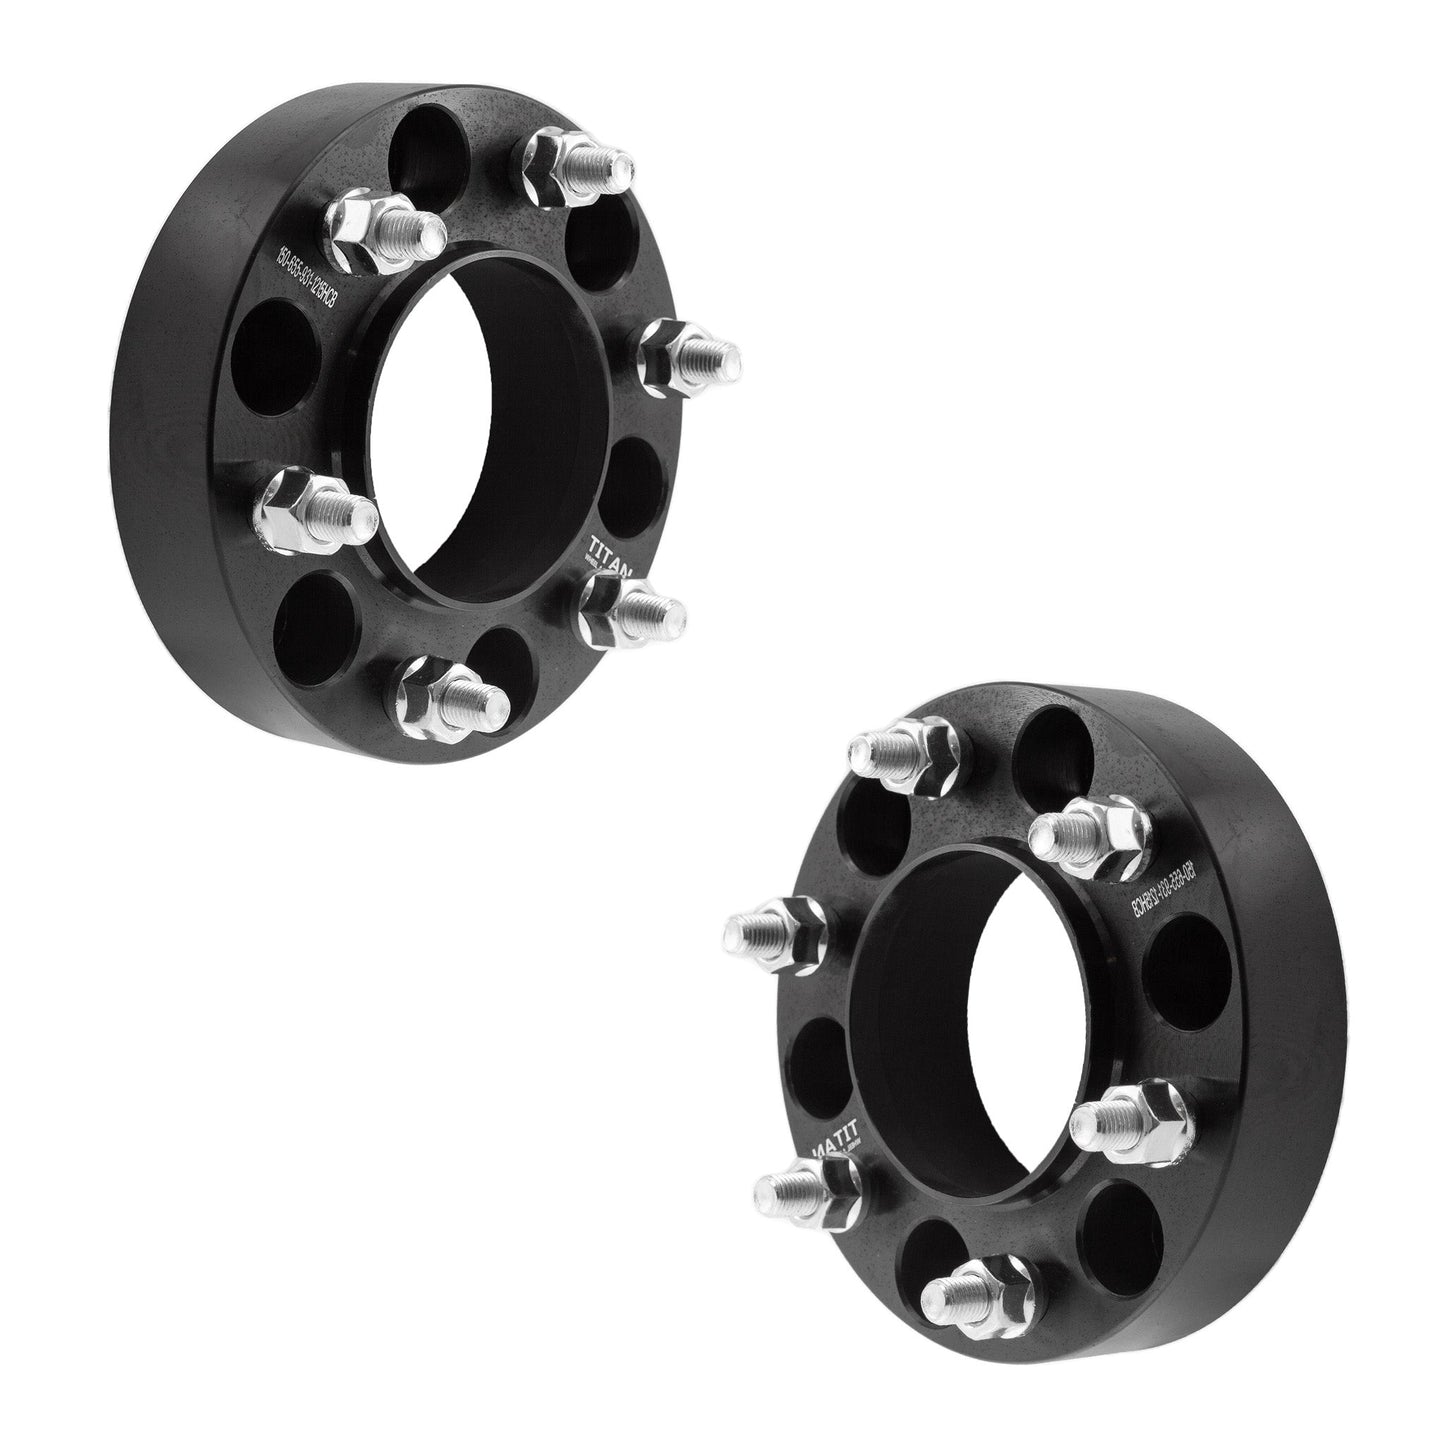 1.5" (38mm) Titan Wheel Spacers for Ford Bronco 2021-2022 Ranger 2019+| 6x5.5 (6x139.7) | 93.1 Hubcentric | 12x1.5 Studs | Set of 4 | Titan Wheel Accessories